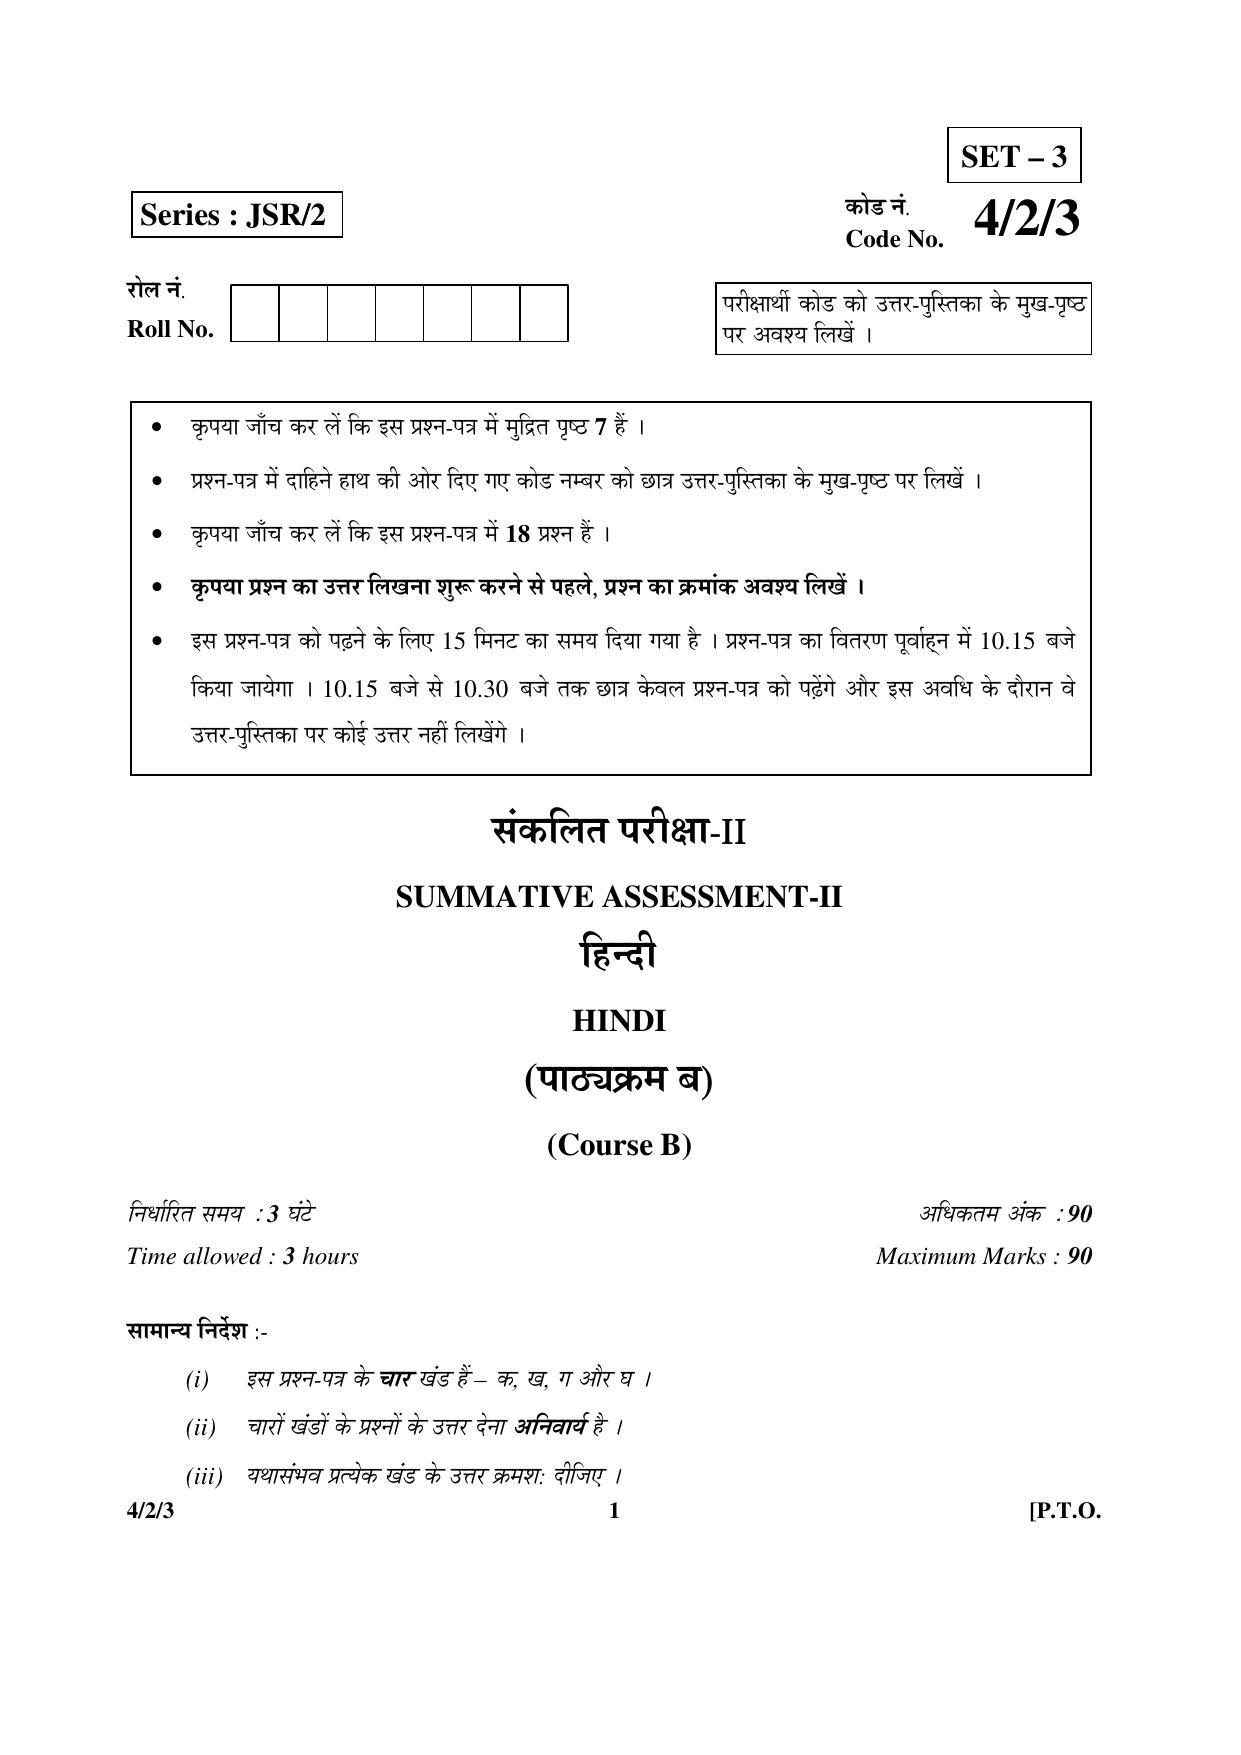 CBSE Class 10 4-2-3  Hindi - B 2016 Question Paper - Page 1